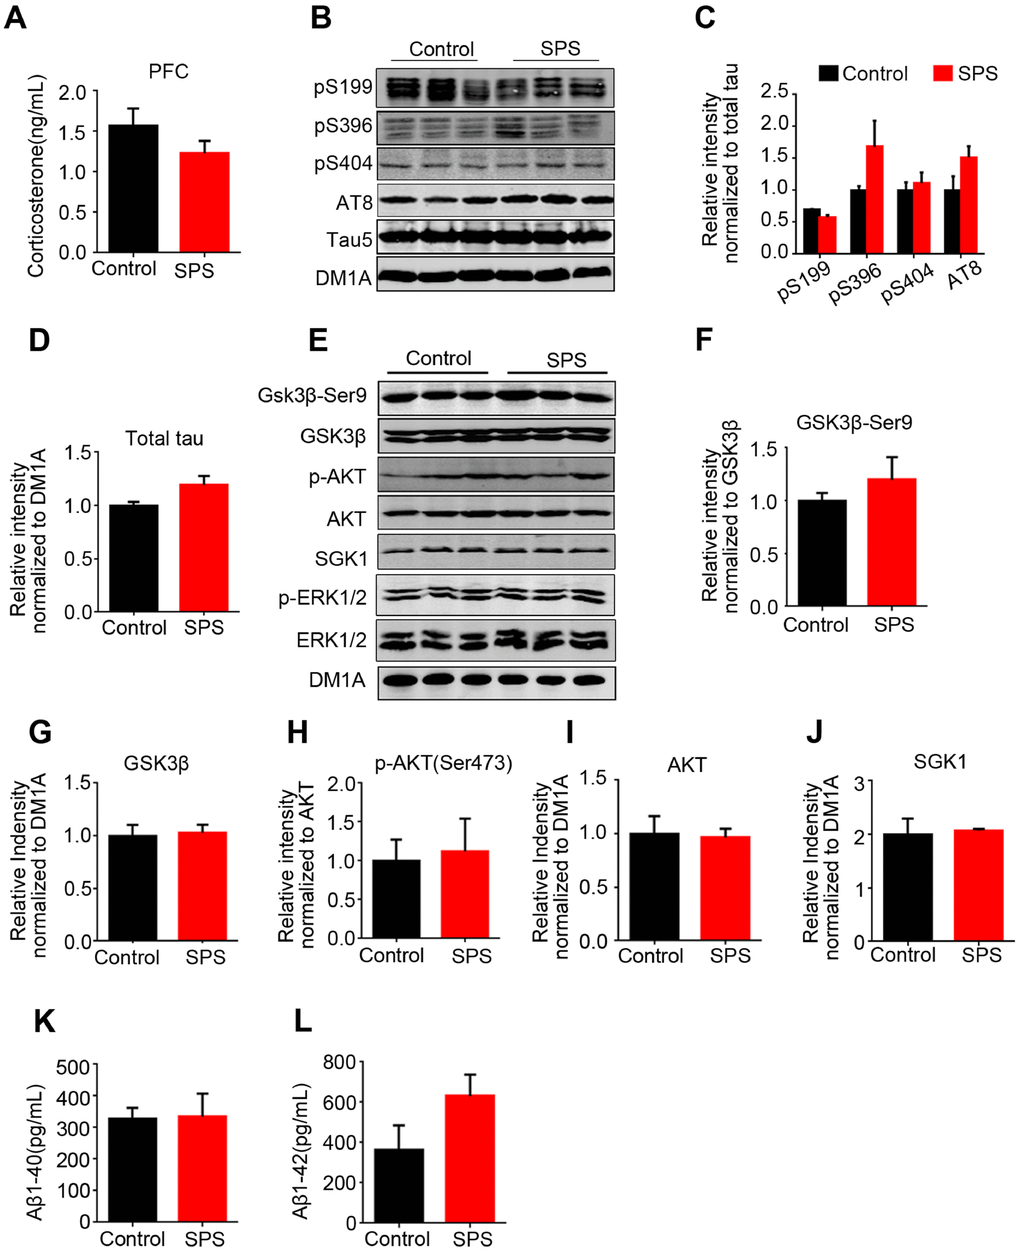 No change of tau and/or tau-related kinases in the prefrontal cortex of SPS rats. (A) The level of corticosterone wasn’t significant different compared with control in prefrontal cortex. (B–D) WB protein bands showed an increase tendency of tau, but no statistical significance. (E–J) tau-related kinase detected by WB showed no changes between the two groups. (K and L) SPS-induced PTSD didn’t alter Aβ1-40 and Aβ1-42 production in the prefrontal cortex. All data represent mean ± SEM, n=3.